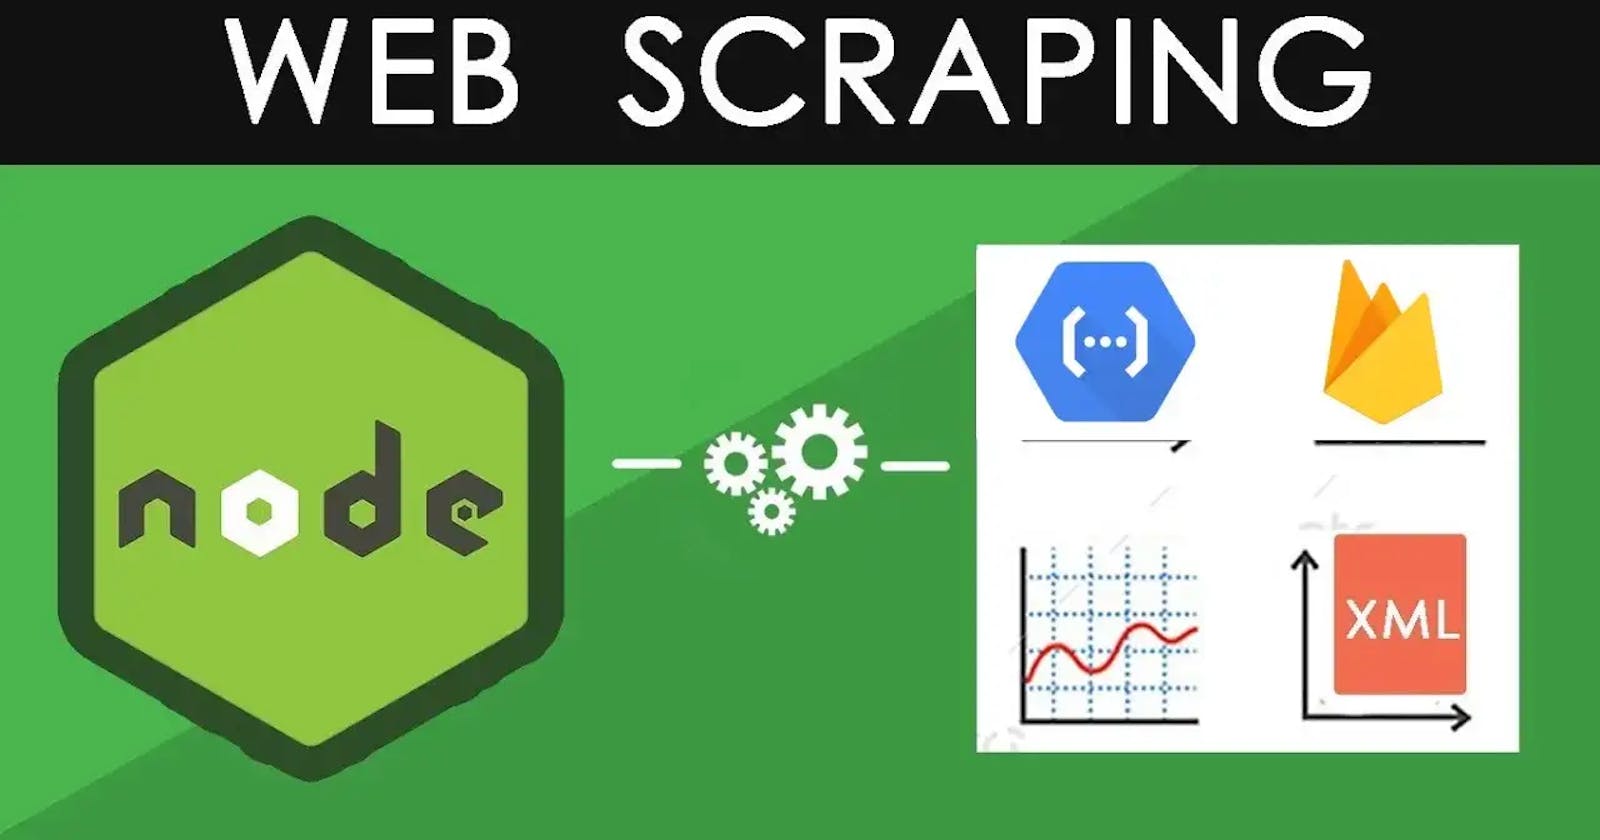 Web Scraping with Firebase